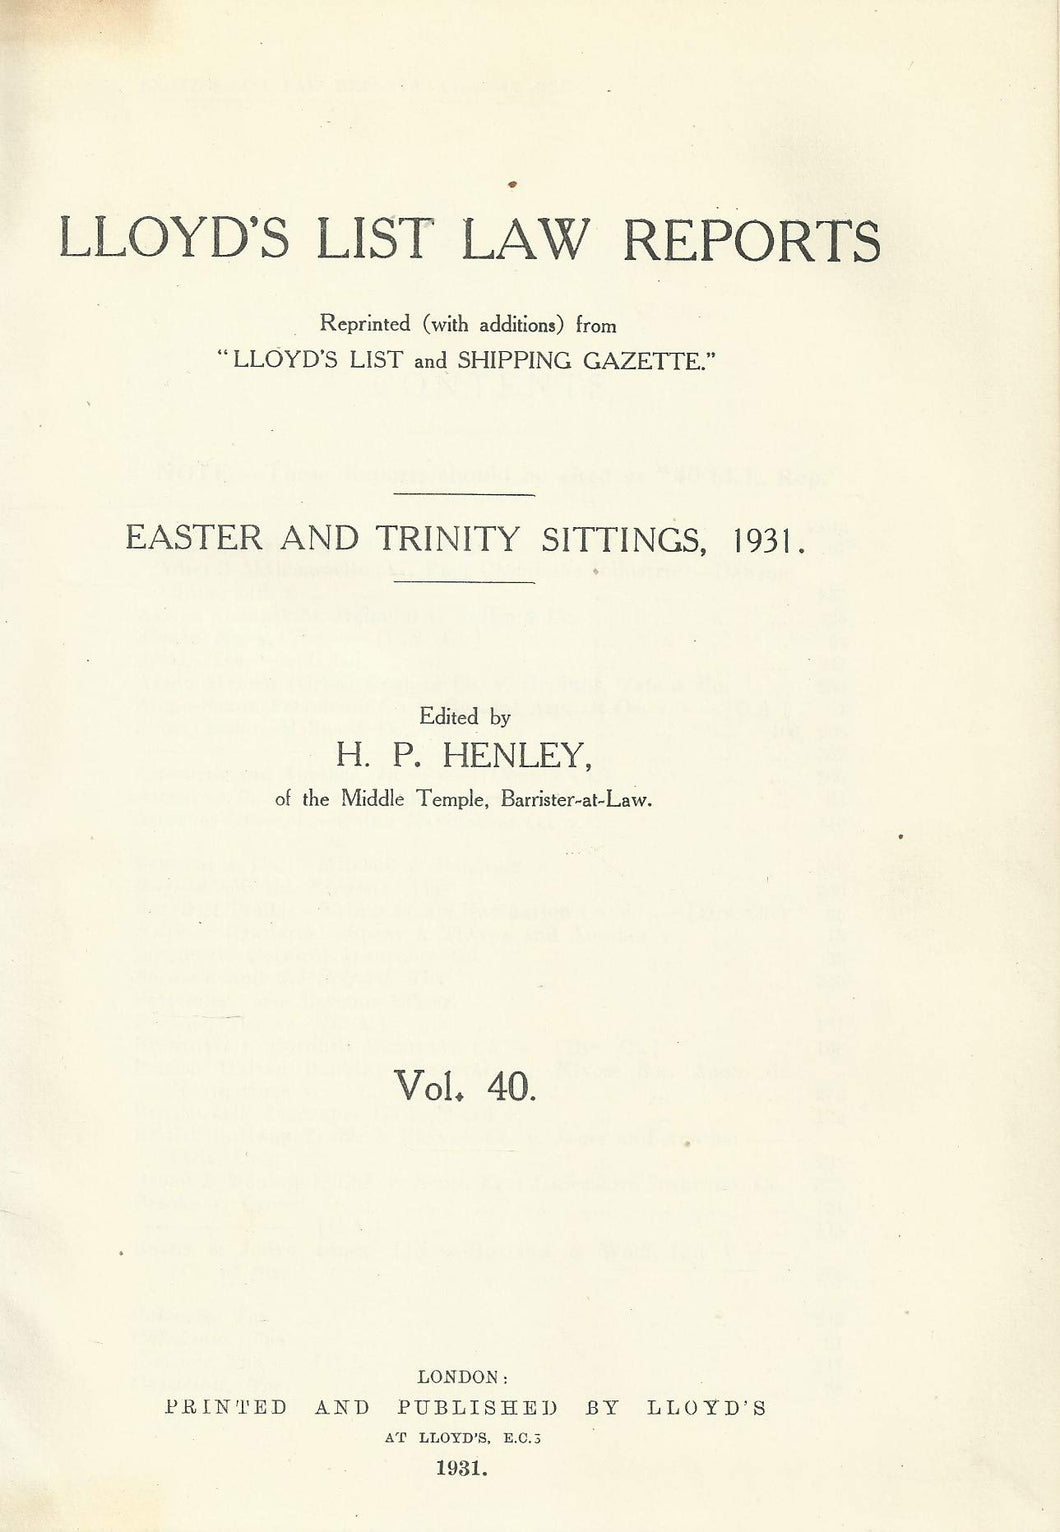 Lloyd's List Law Reports - Volume 40, Easter and Trinity Sittings, 1941